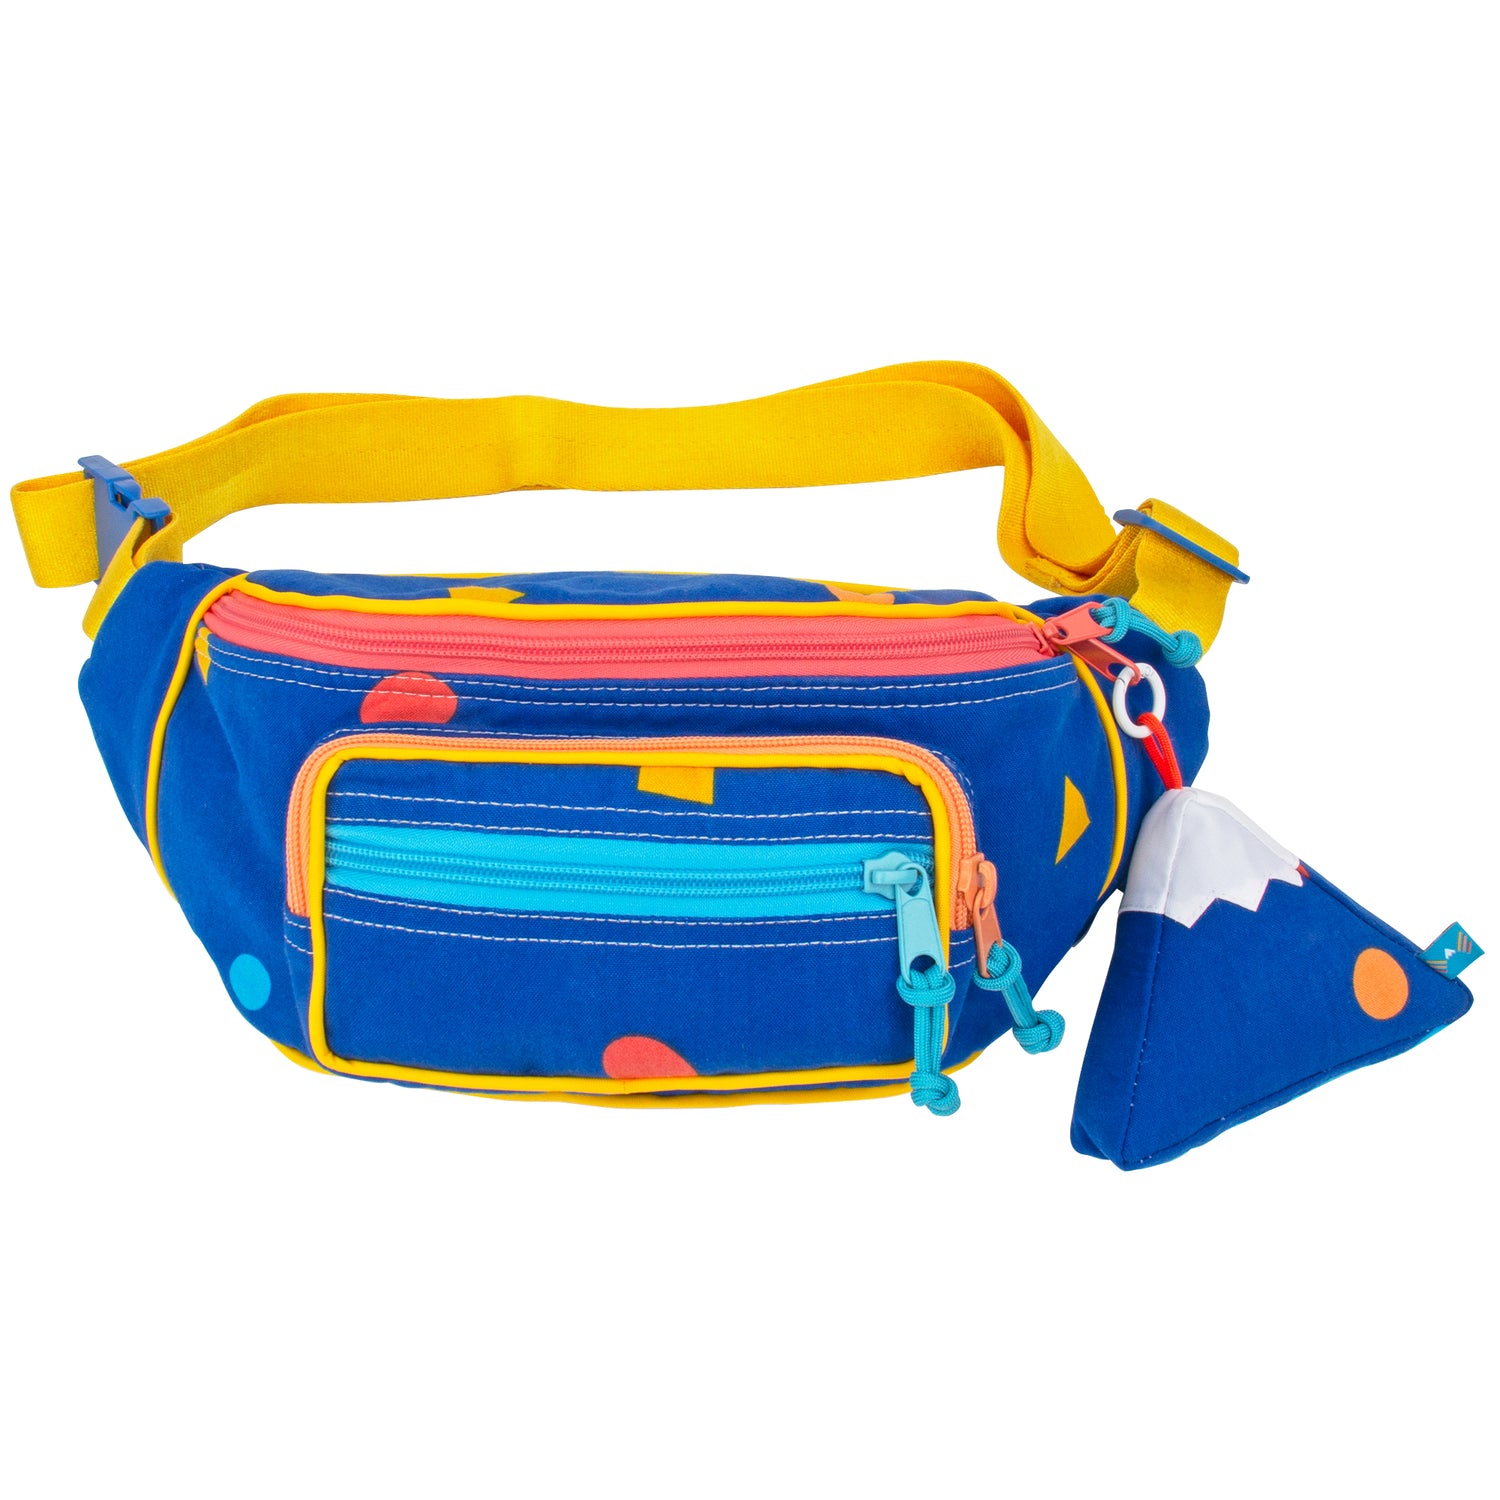 Large fanny pack sling in mostly blue with colorful designs with a mountain design keychain